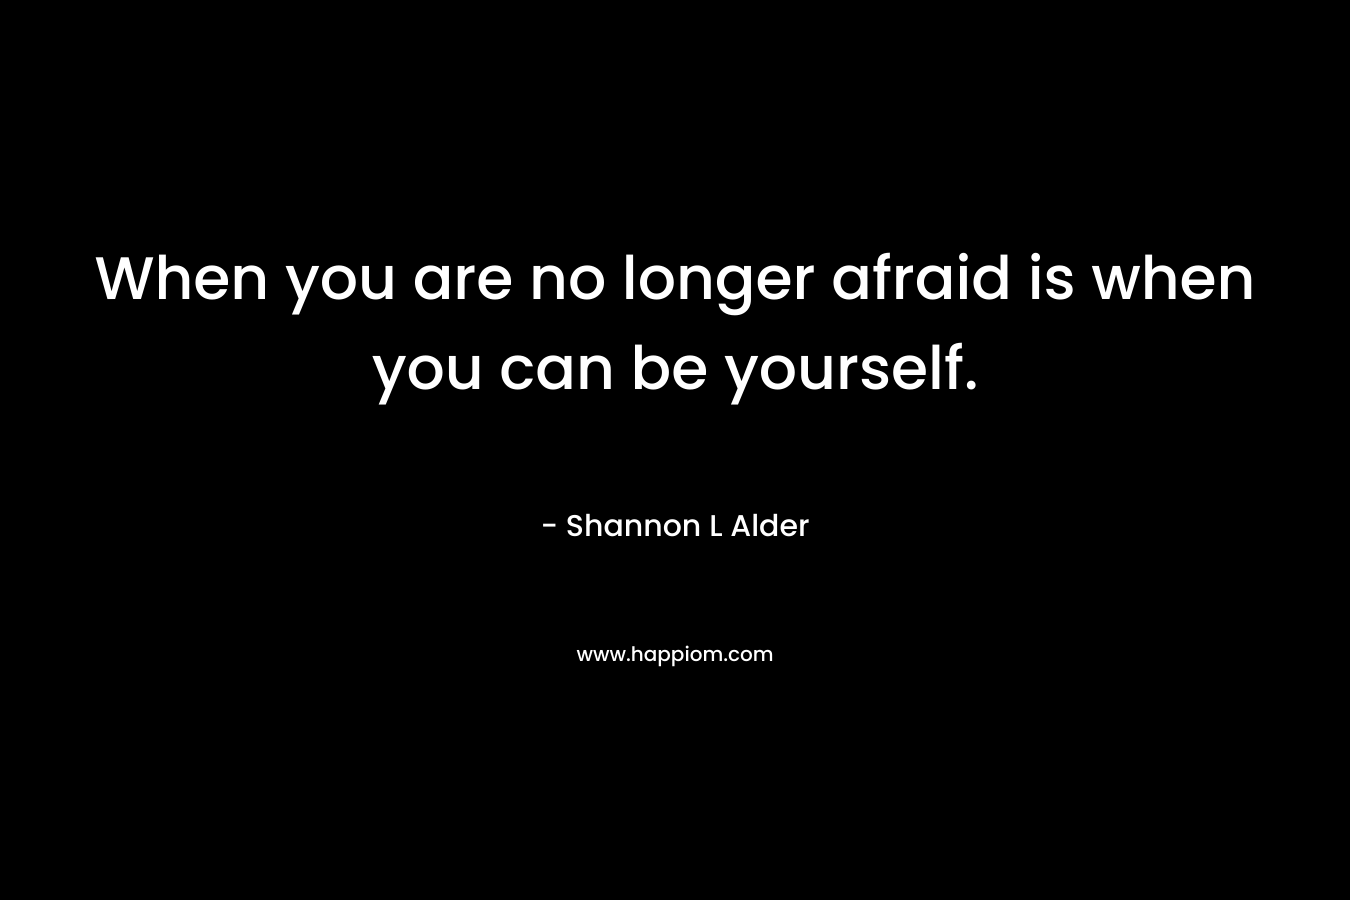 When you are no longer afraid is when you can be yourself.